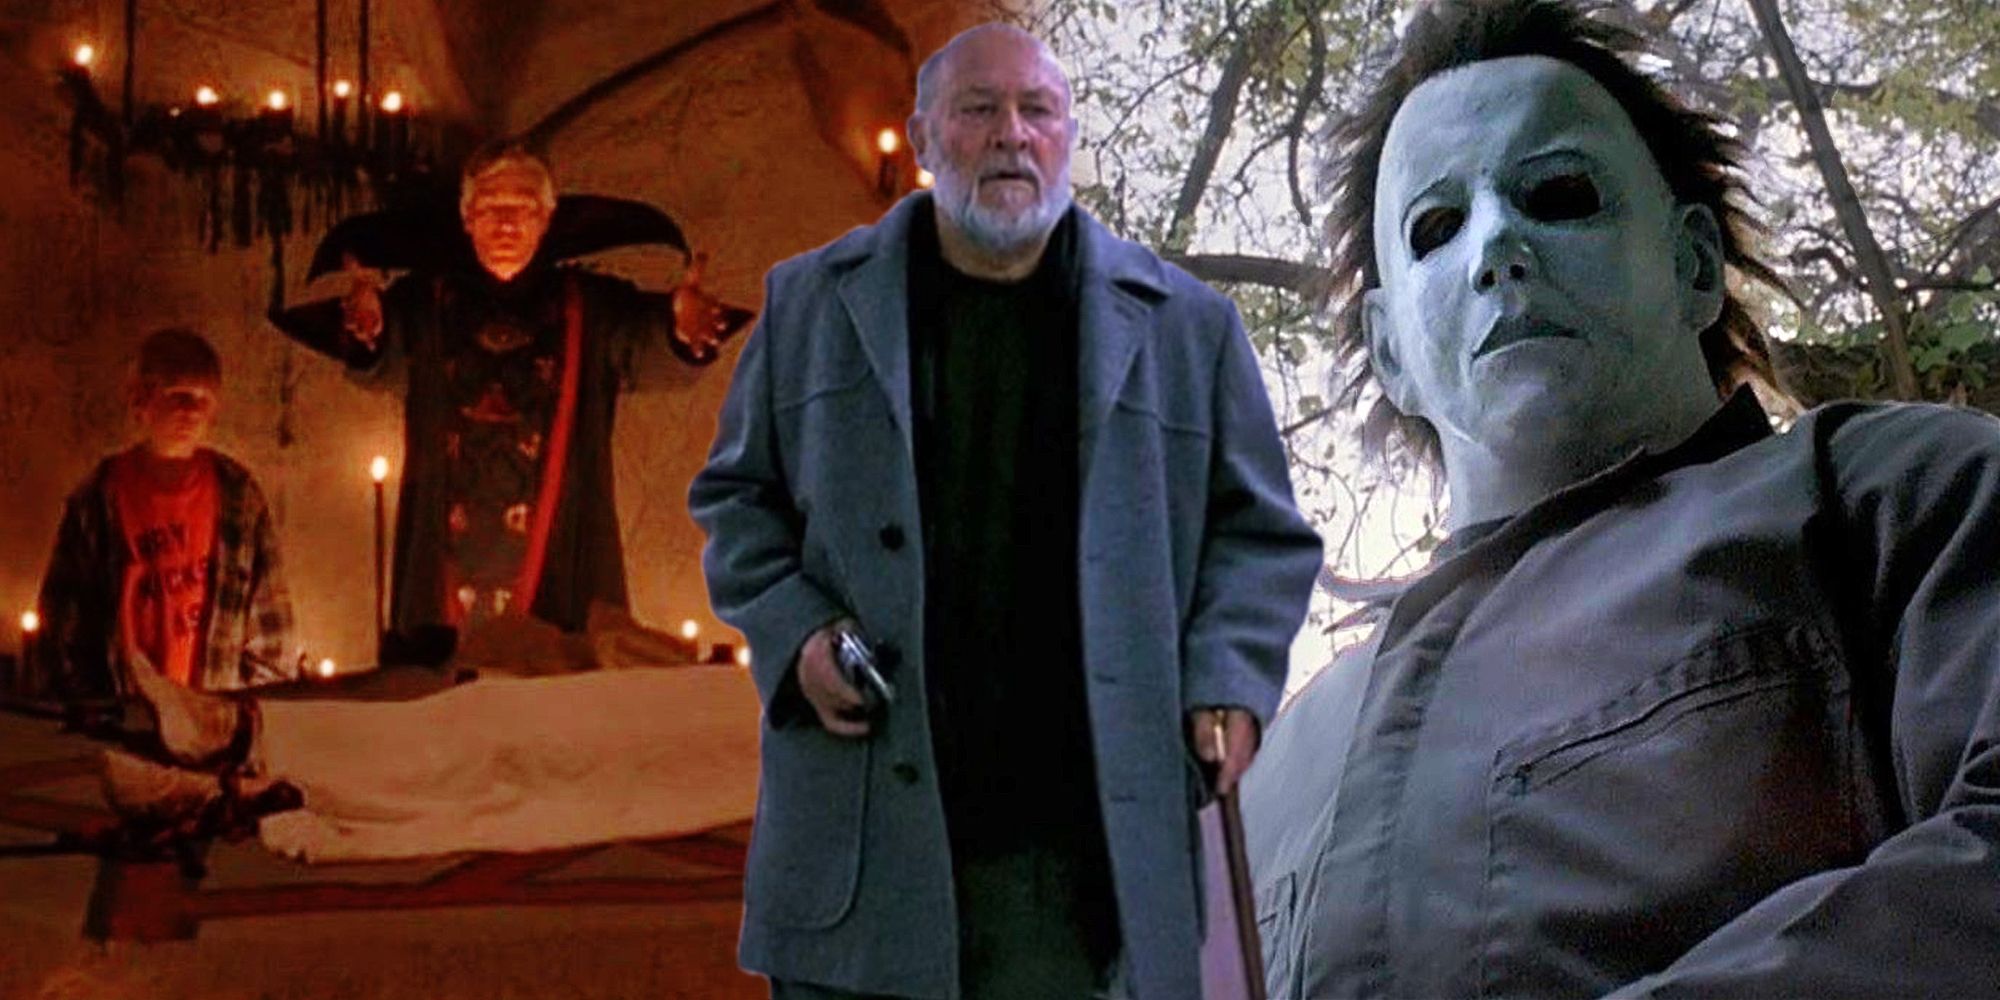 The Cult of Thorn and Dr. Loomis in Halloween 6 The Curse of Michael Myers